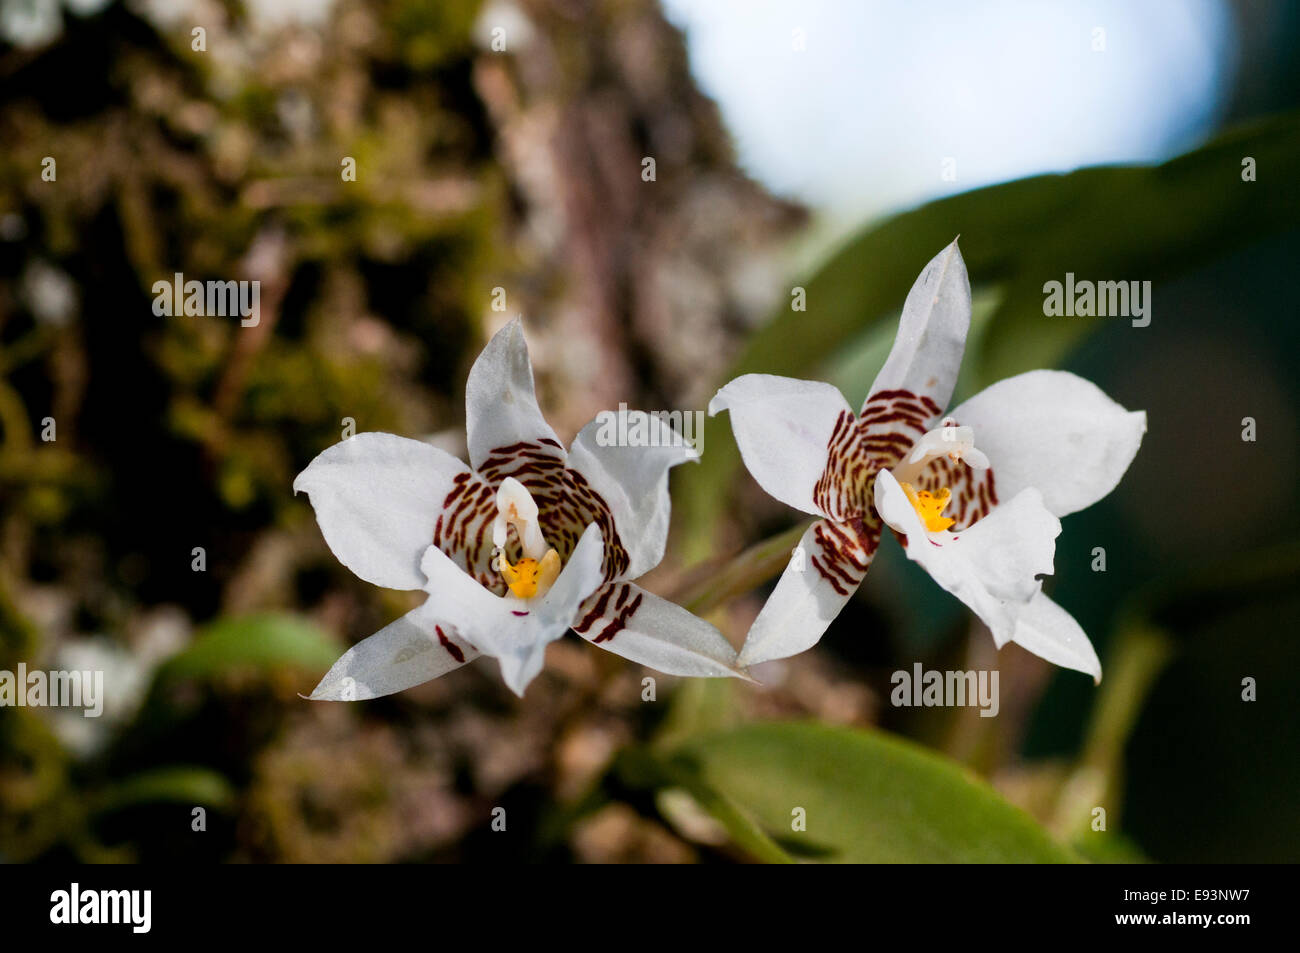 Two flowers of the epiphytic orchid Rhynochostele cervantesii found in Mil Cumbres National Park, Mexico Stock Photo